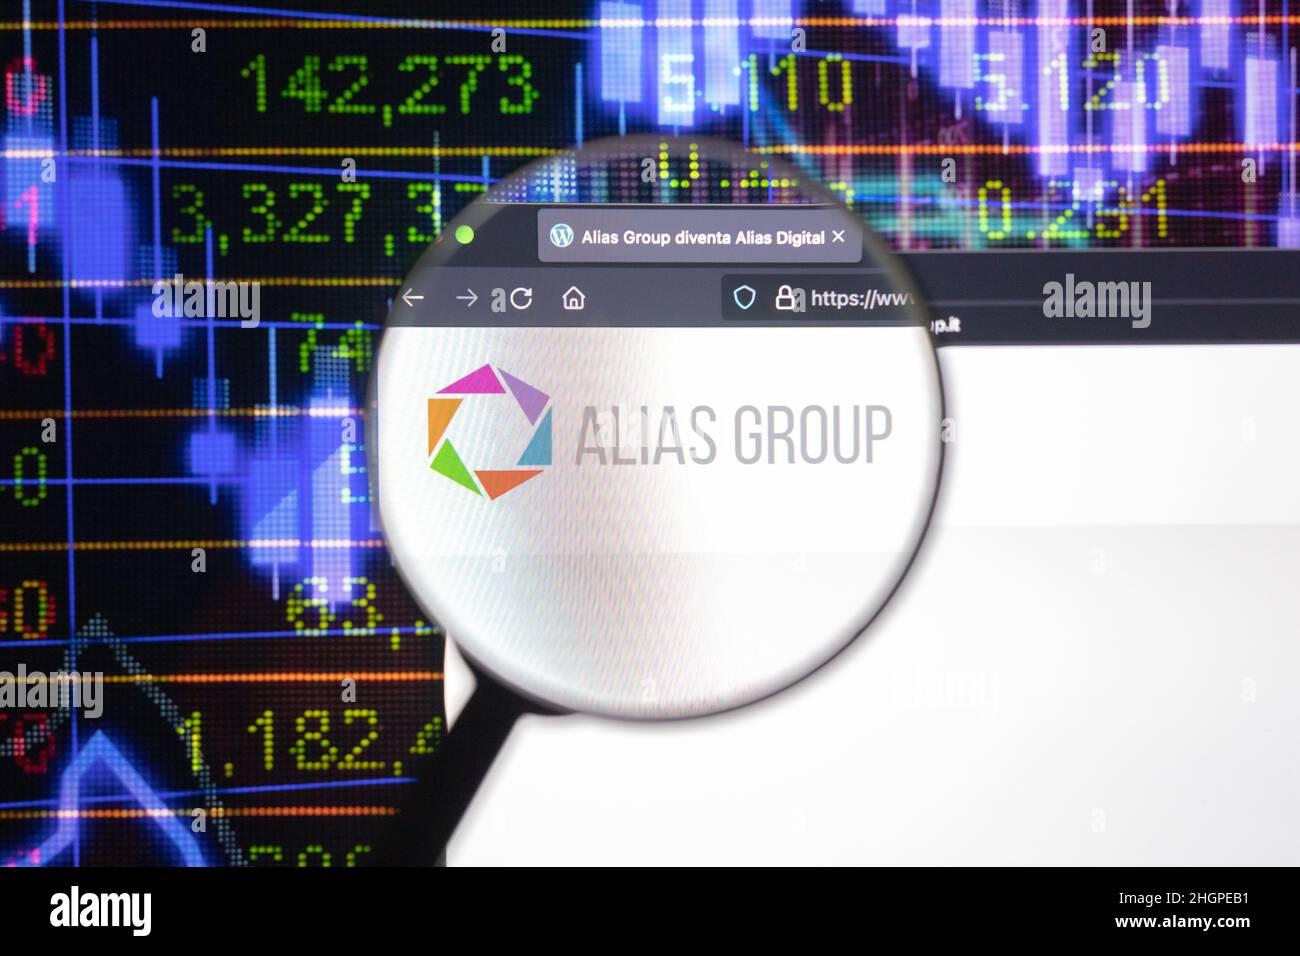 Alias Group company logo on a website with blurry stock market developments in the background, seen on a computer screen through a magnifying glass. Stock Photo